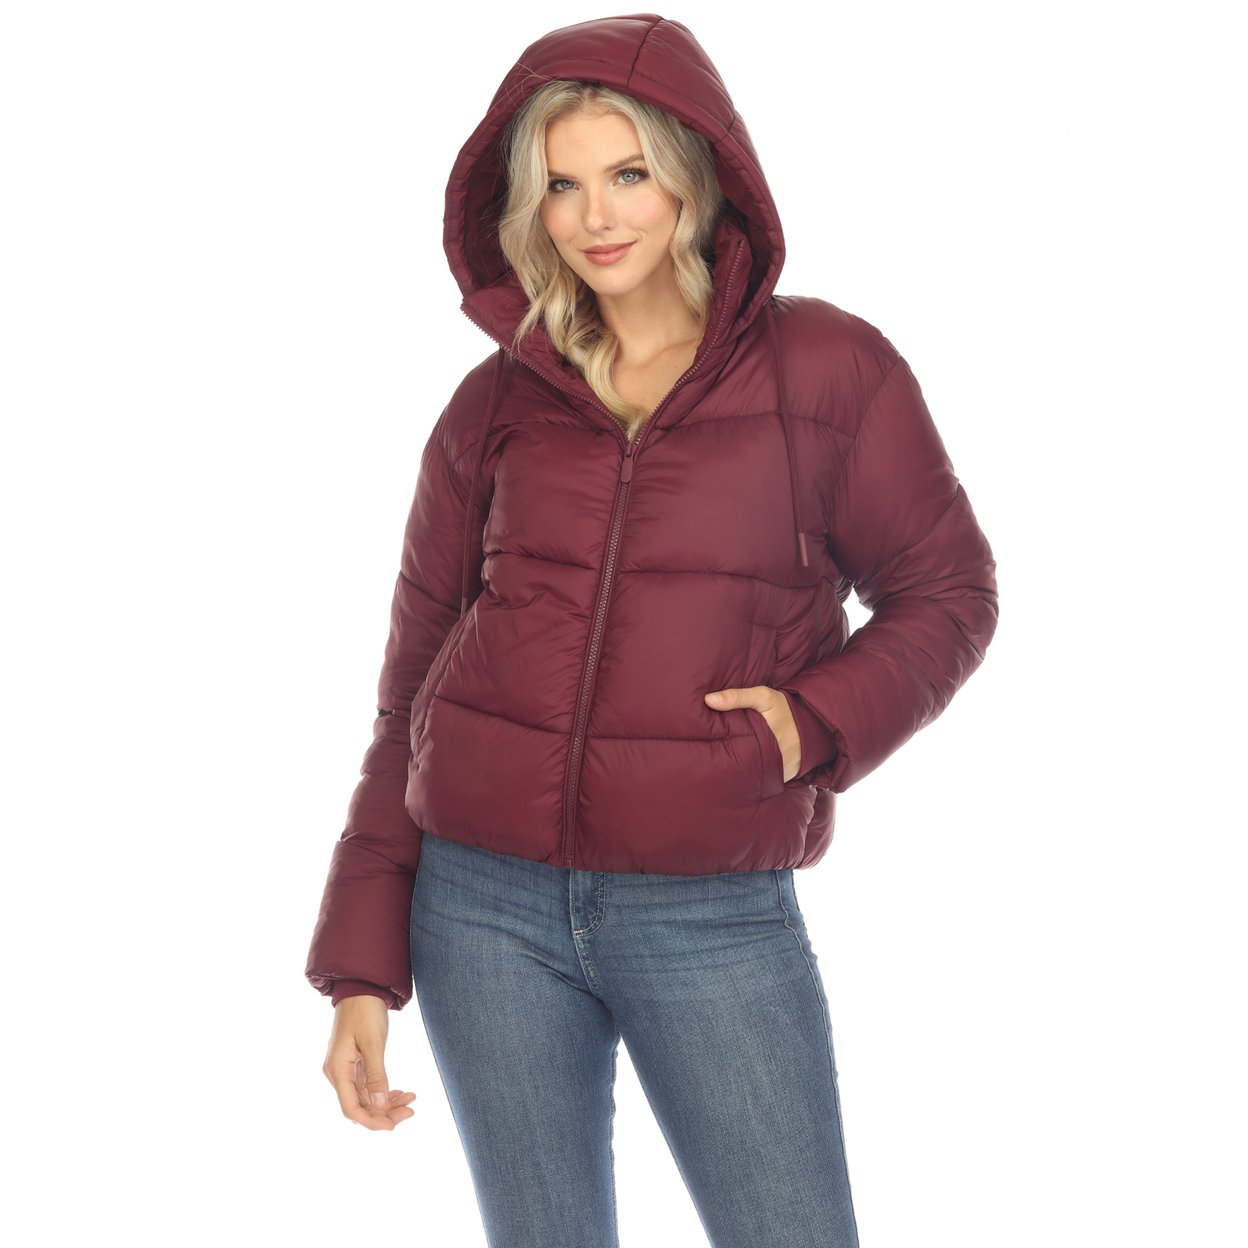 White Mark Women's Zip Hooded Puffer Jacket With Pockets - Burgundy, X-large